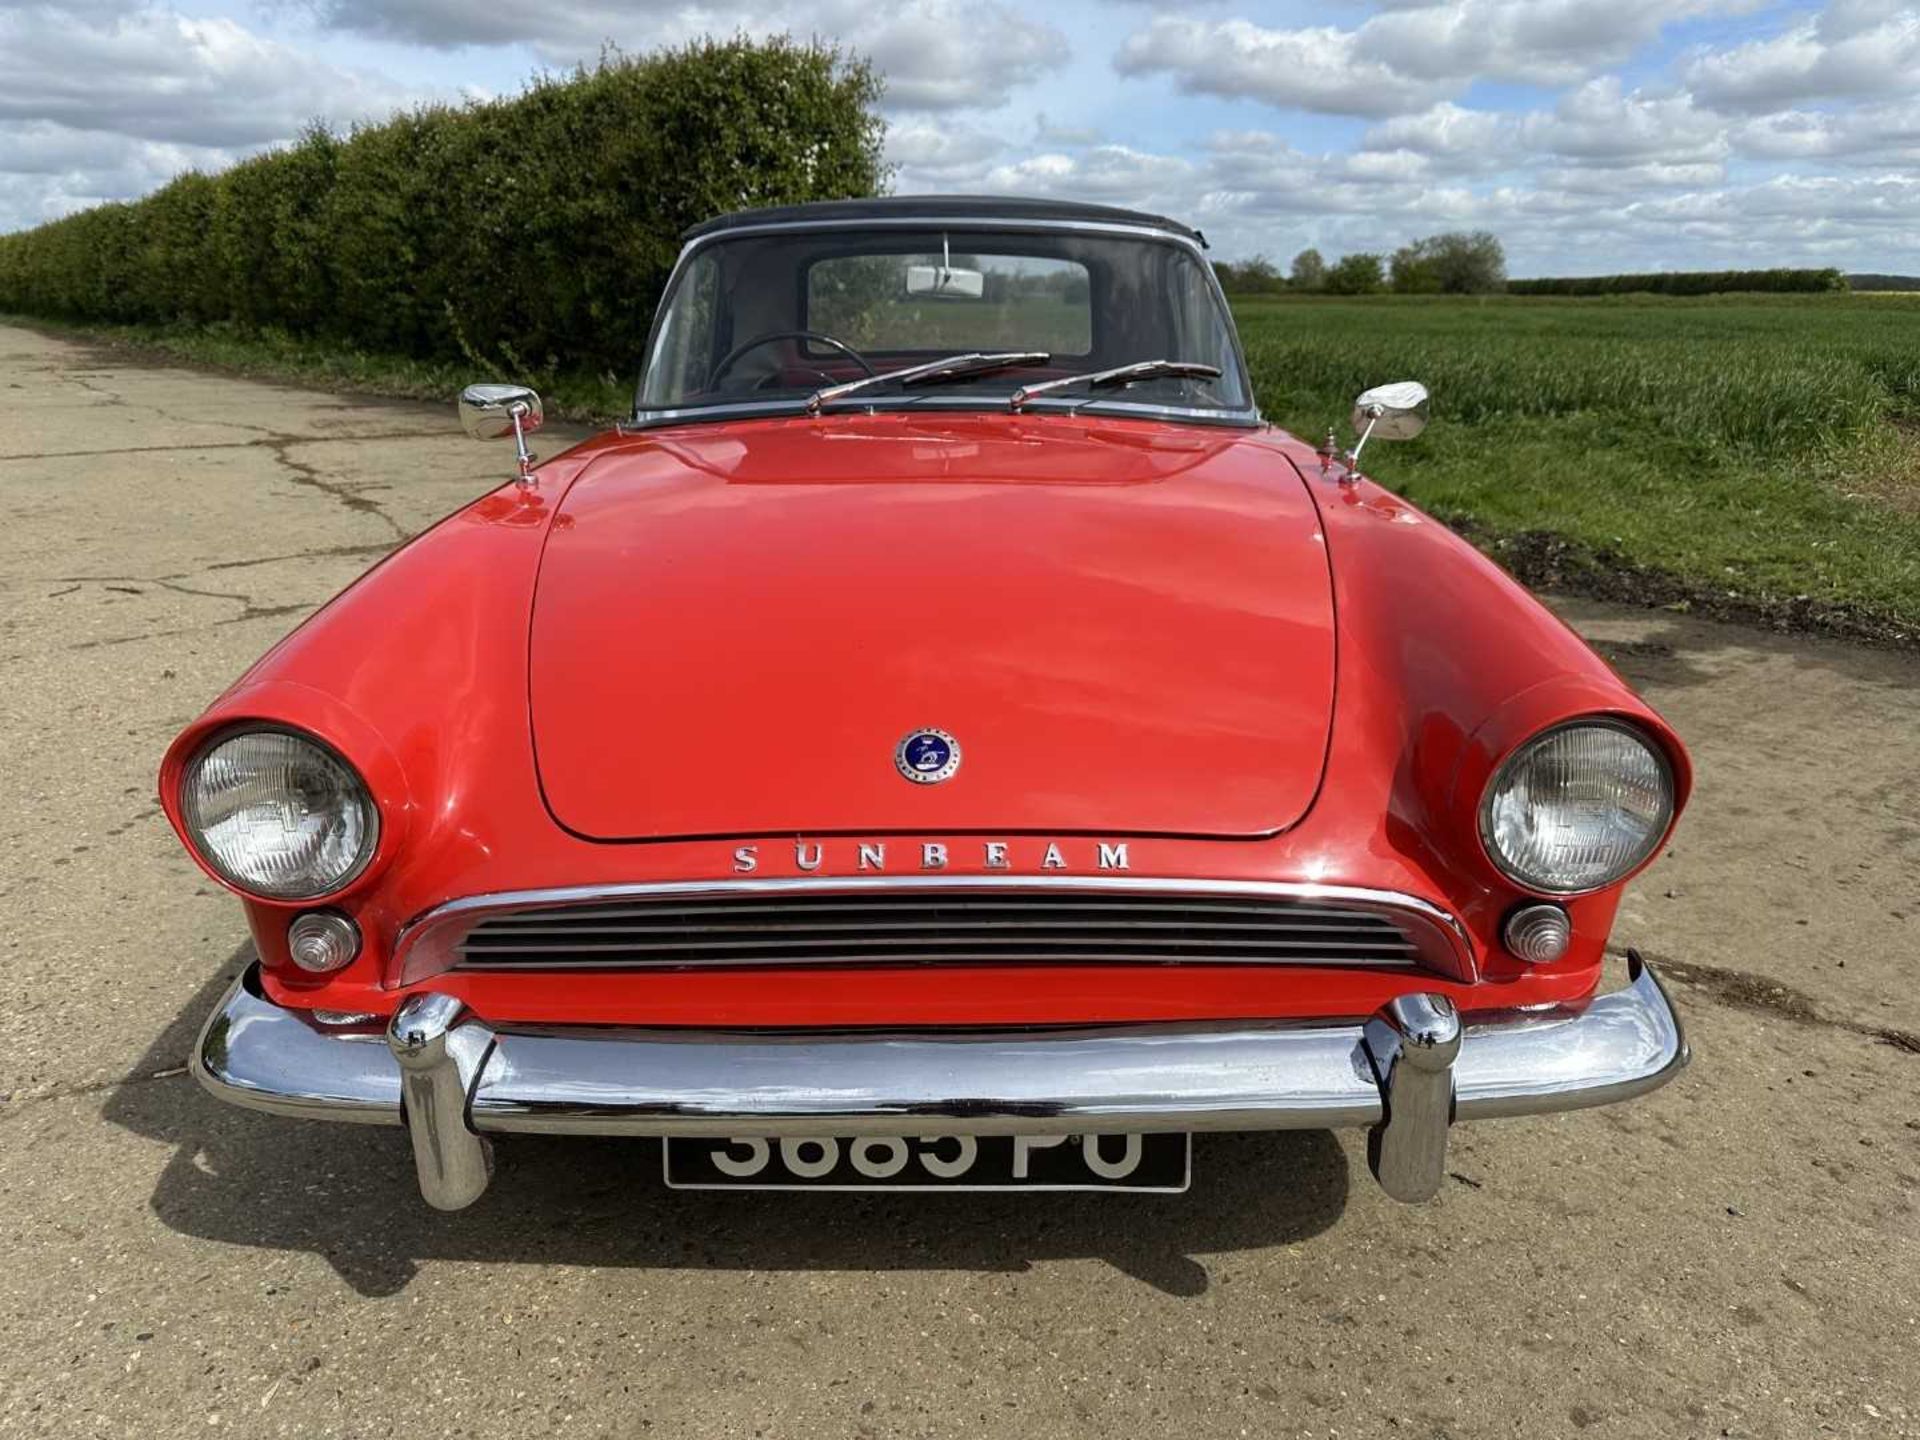 1960 Sunbeam Alpine sports convertible, 1600cc engine, manual gearbox with overdrive, reg. no. 3685 - Image 6 of 30